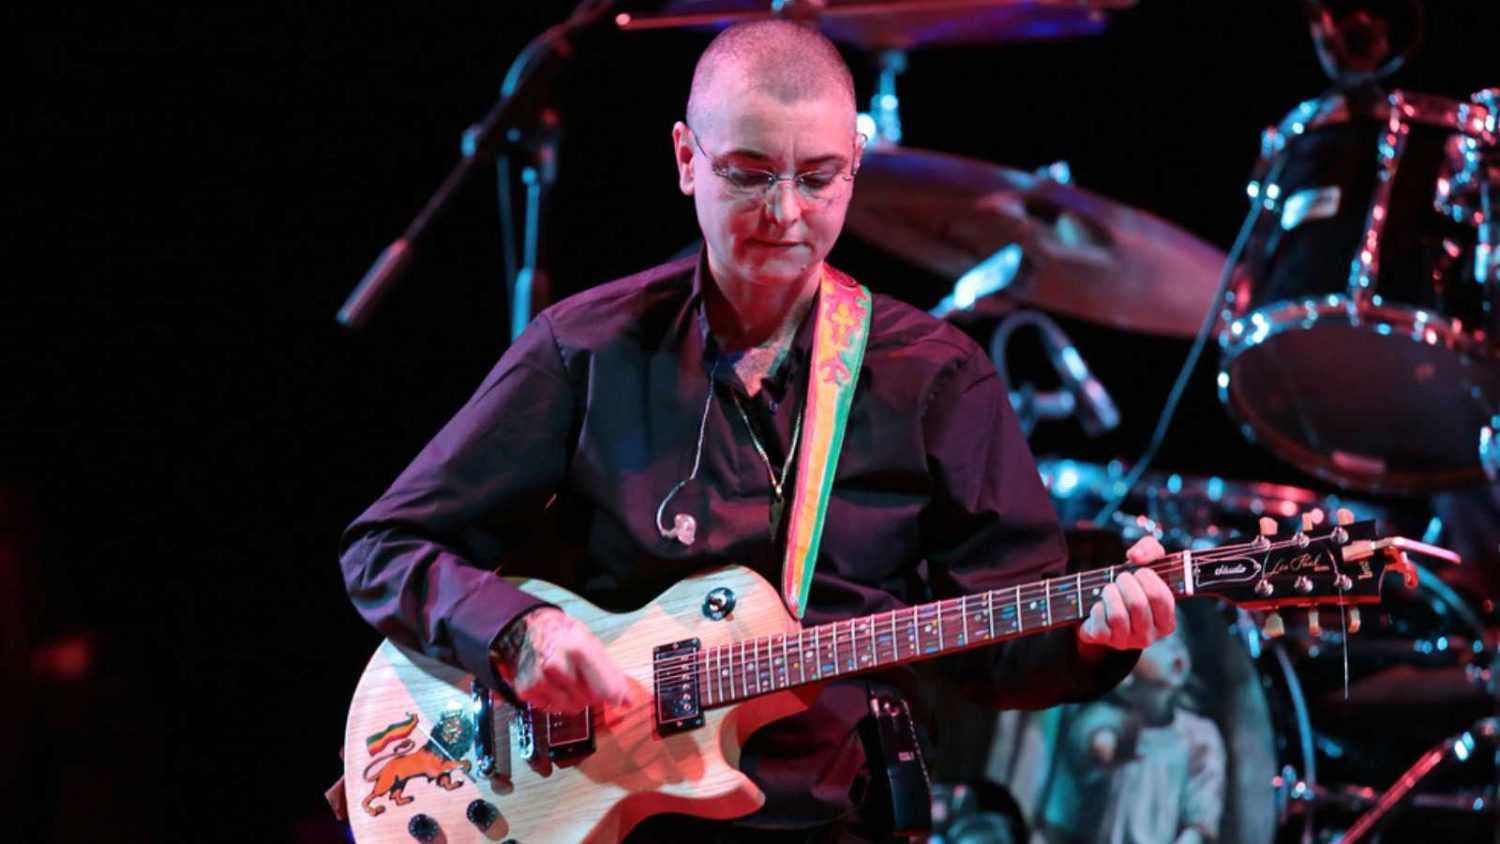 VENICE, ITALY - APRIL 02: Irish singer Sinead O'Connor during the first concert of "THE CRAZY BALDHEAD TOUR" at the Teatro la Fenice and for the first time in Venice. April 02, 2013 in Venice, Italy